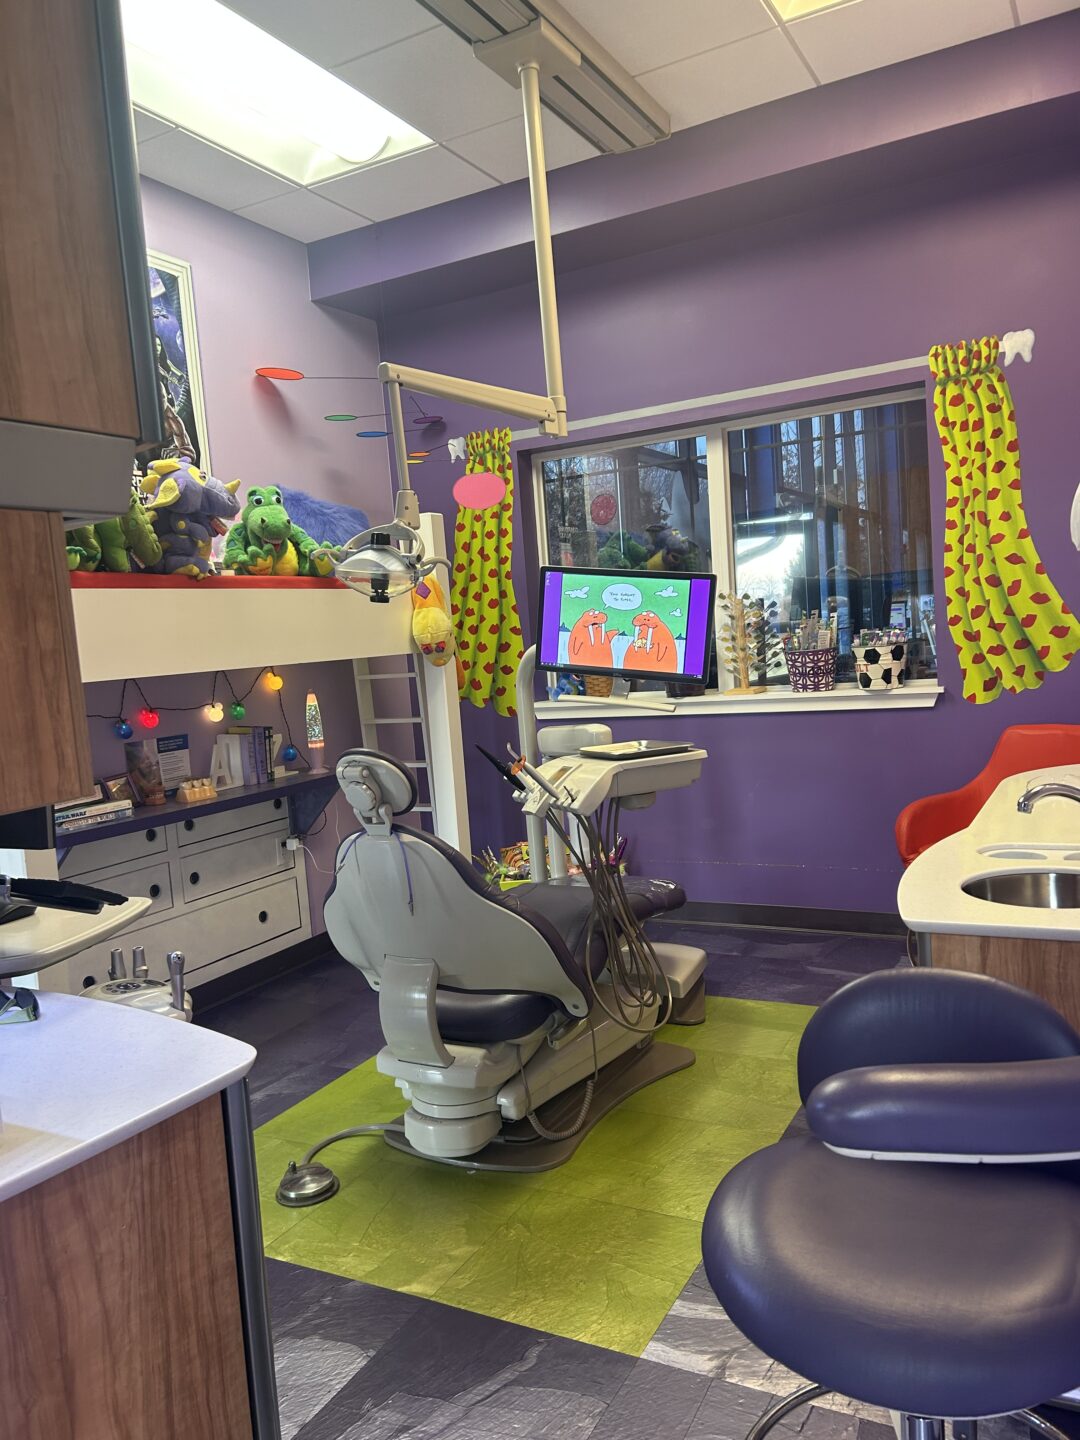  Image of kids’ dental exam room with puppets and a large-screen TV. 